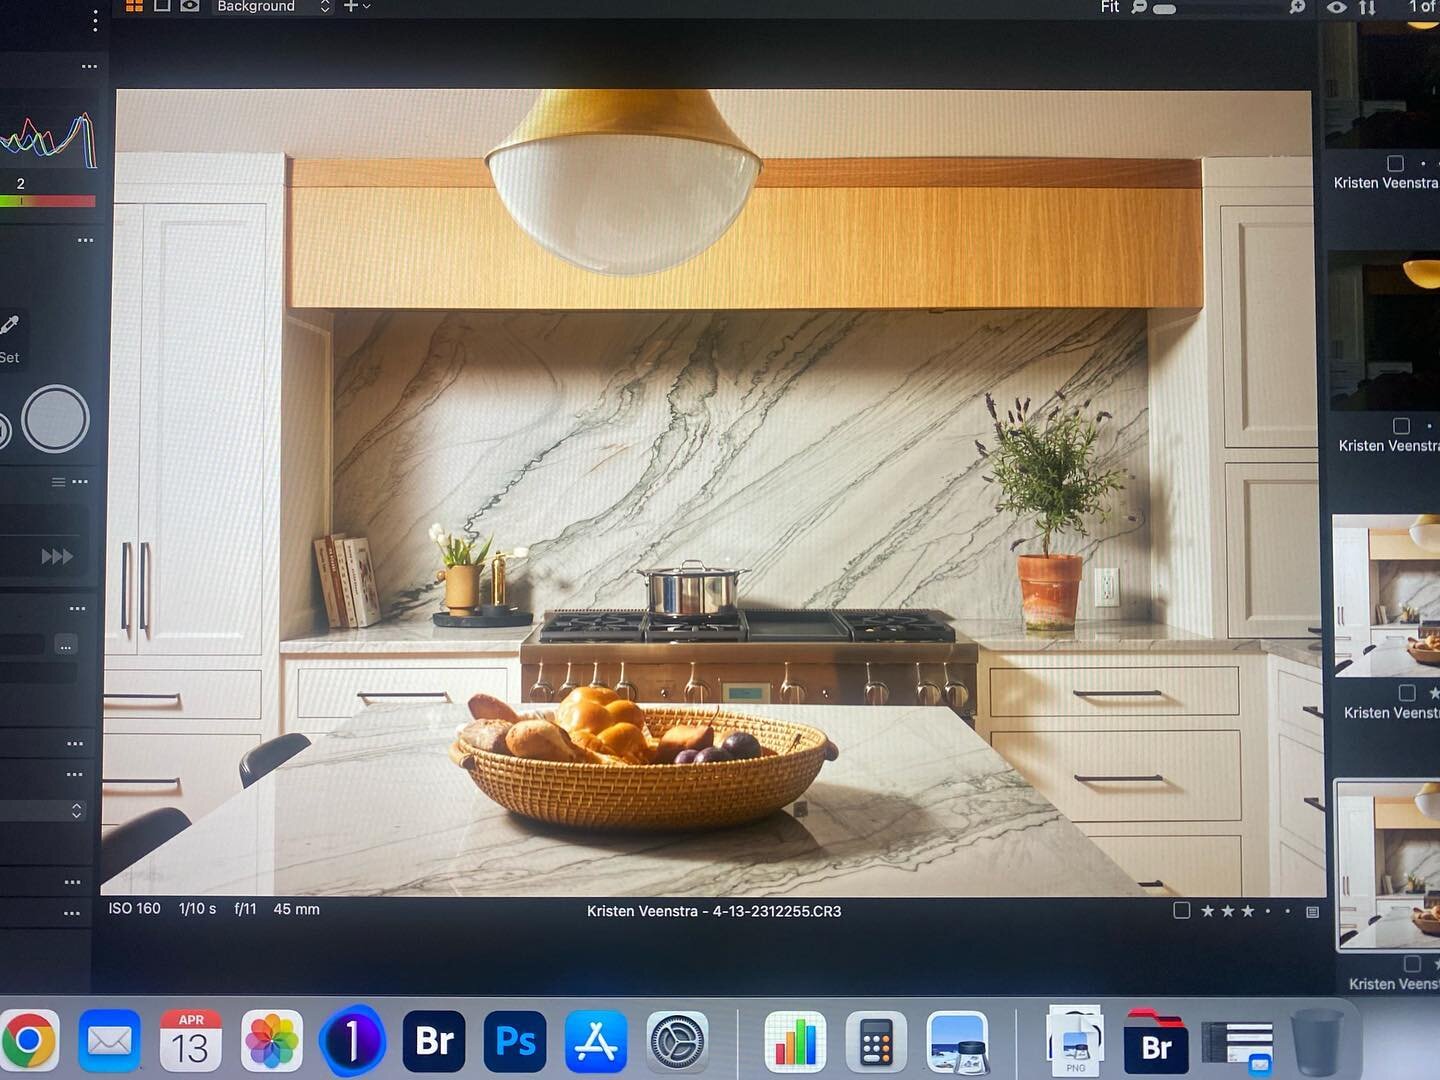 Photoshoot day!  Sharing a peek into this exciting remodel that featured a dynamic kitchen overhaul. It&rsquo;s all about natural texture and materials and that beautiful slab backsplash. More in stories, and more to come soon!